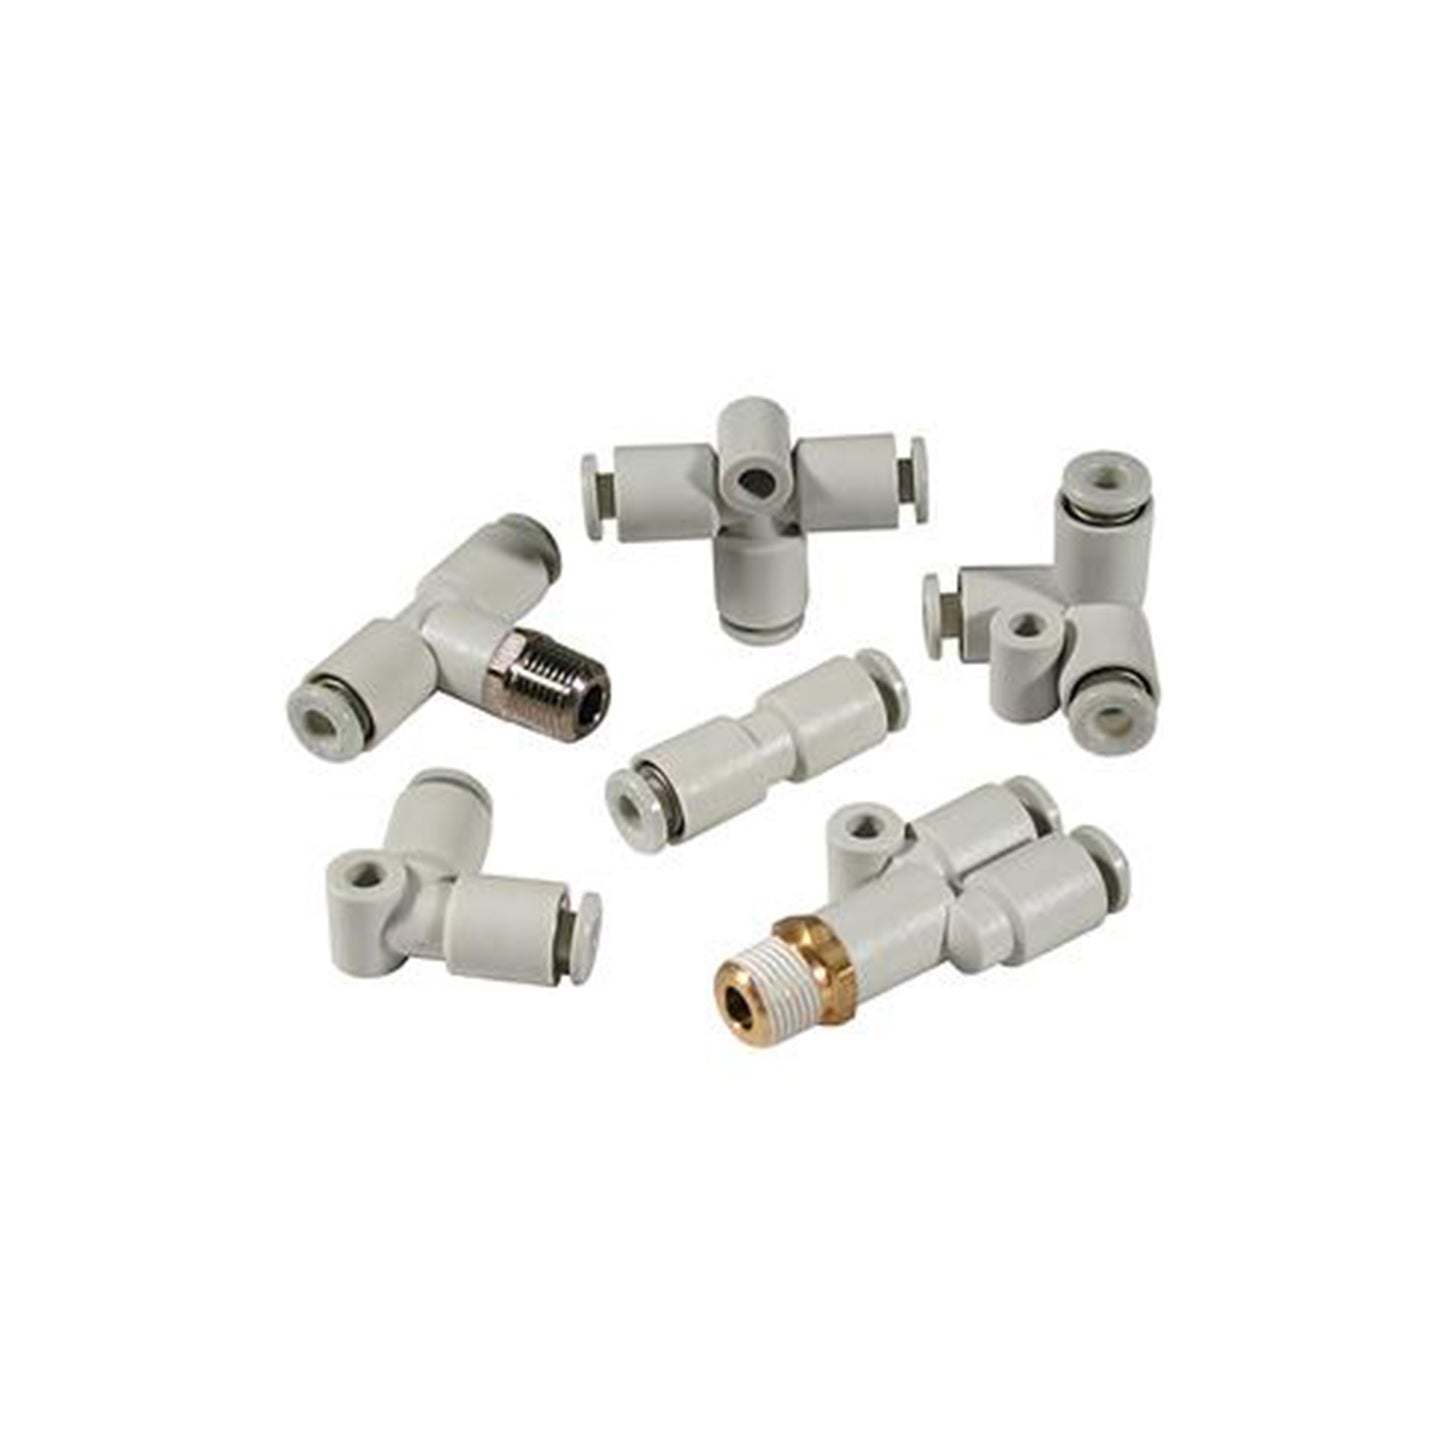 SMC KQ2H08-U03 | Unifit Male Connector Fitting